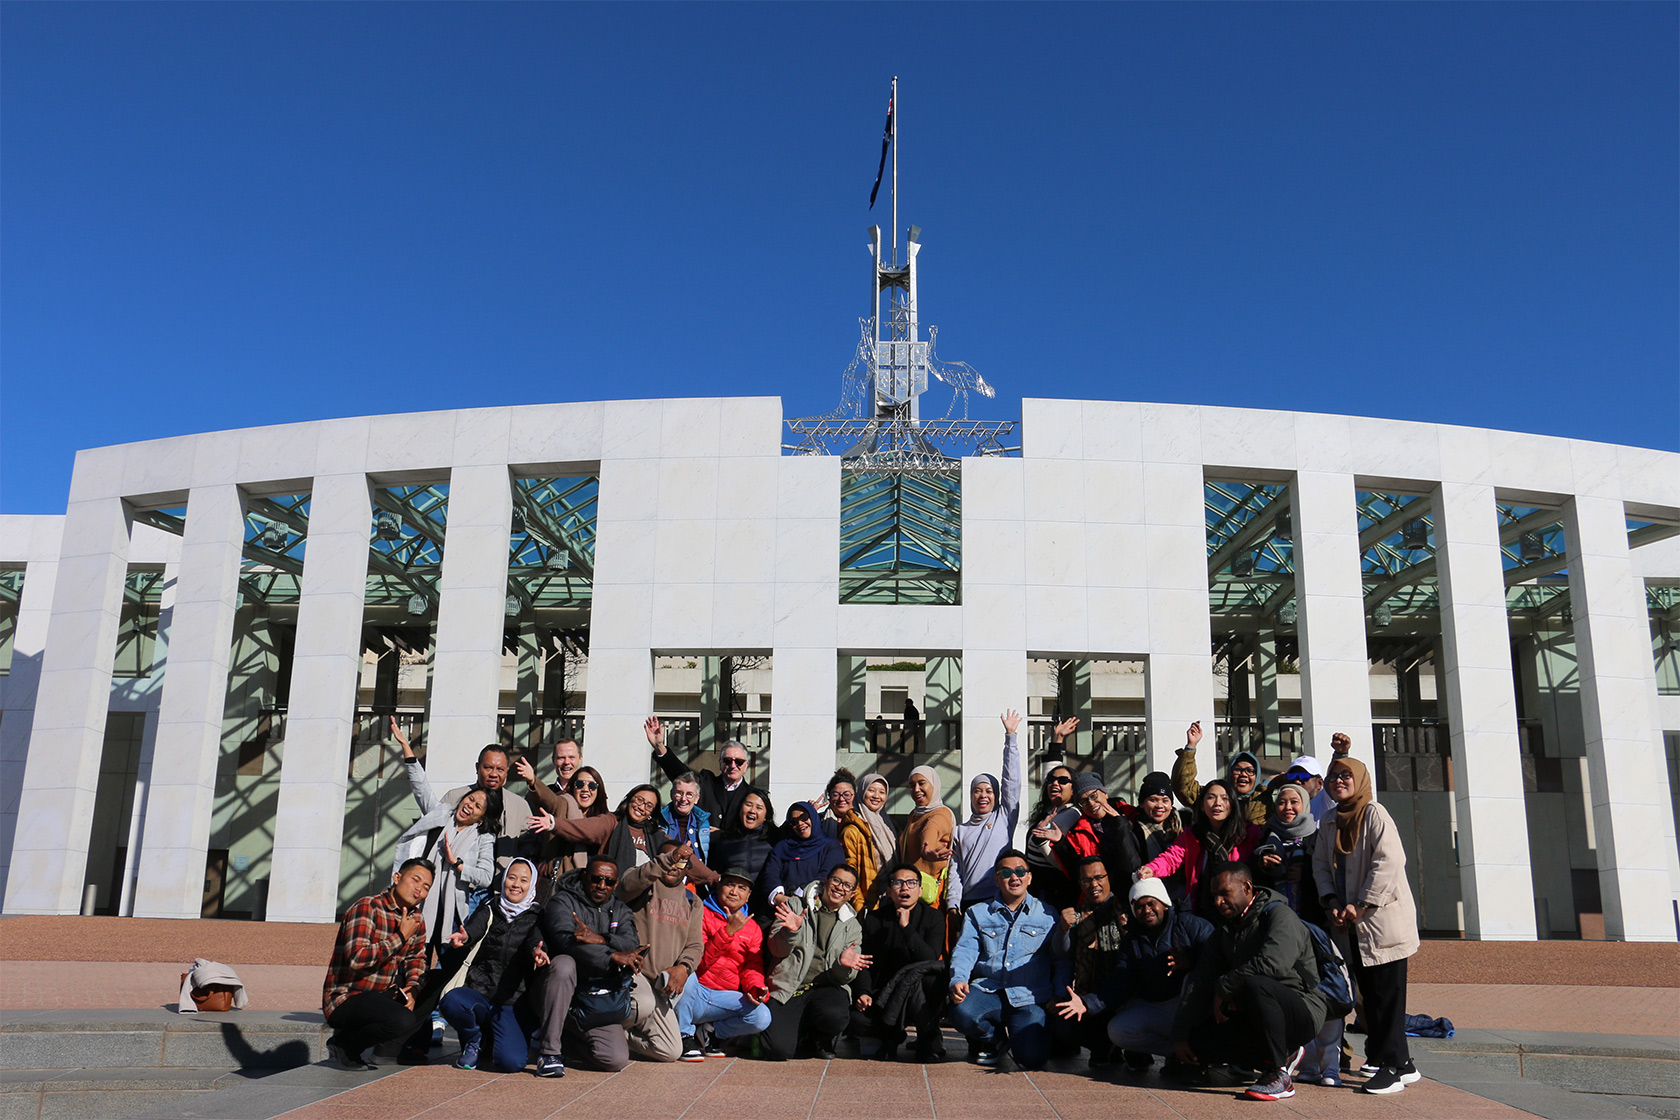 The short course participants gather in front of the Parliament House in Canberra.